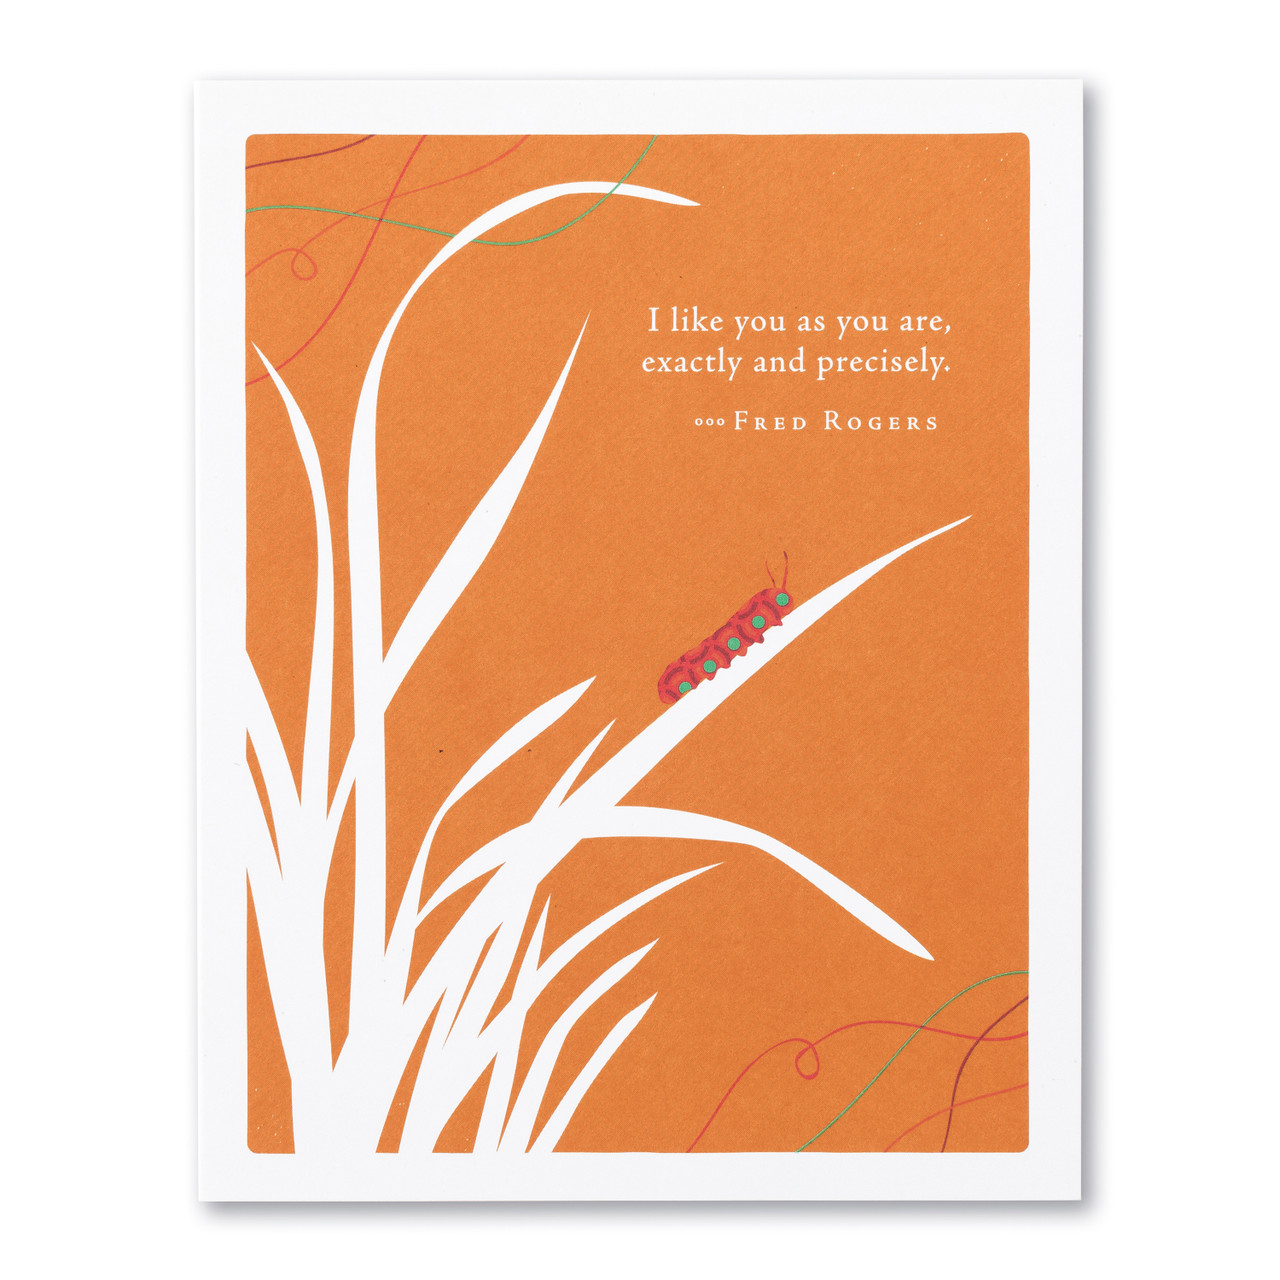 Positively Green Love Greeting Card - “I like you as you are, exactly and precisely.” —FRED ROGERS - Mellow Monkey